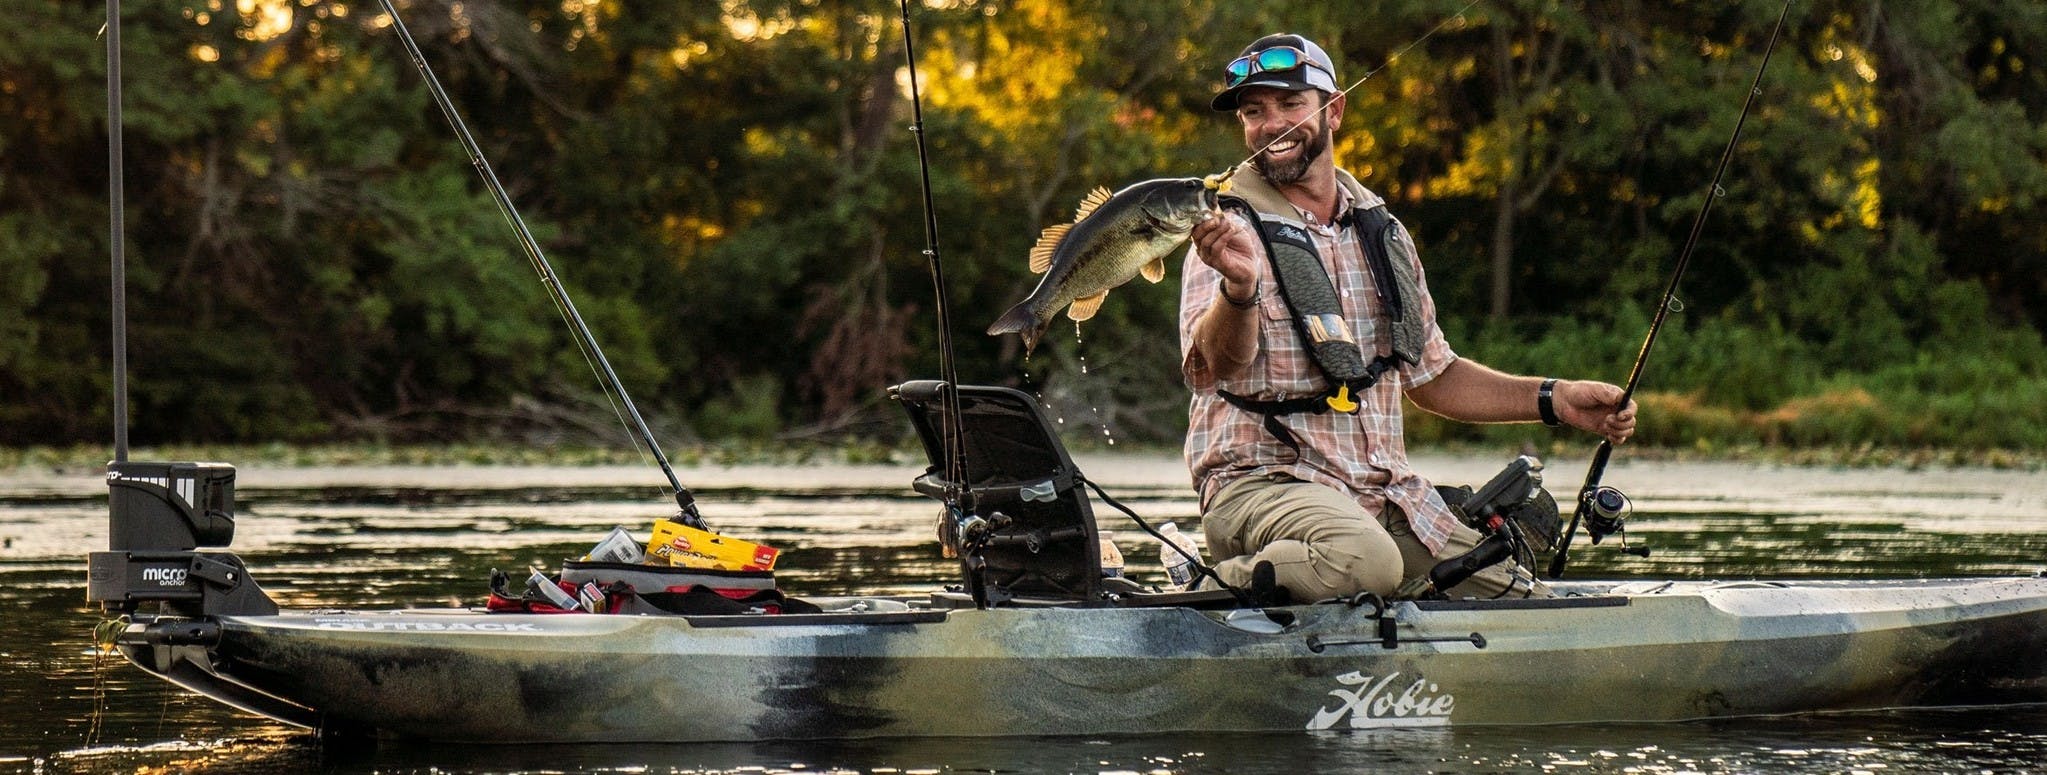 Why Hobie Kayaks Are The Best Choice For Fishing